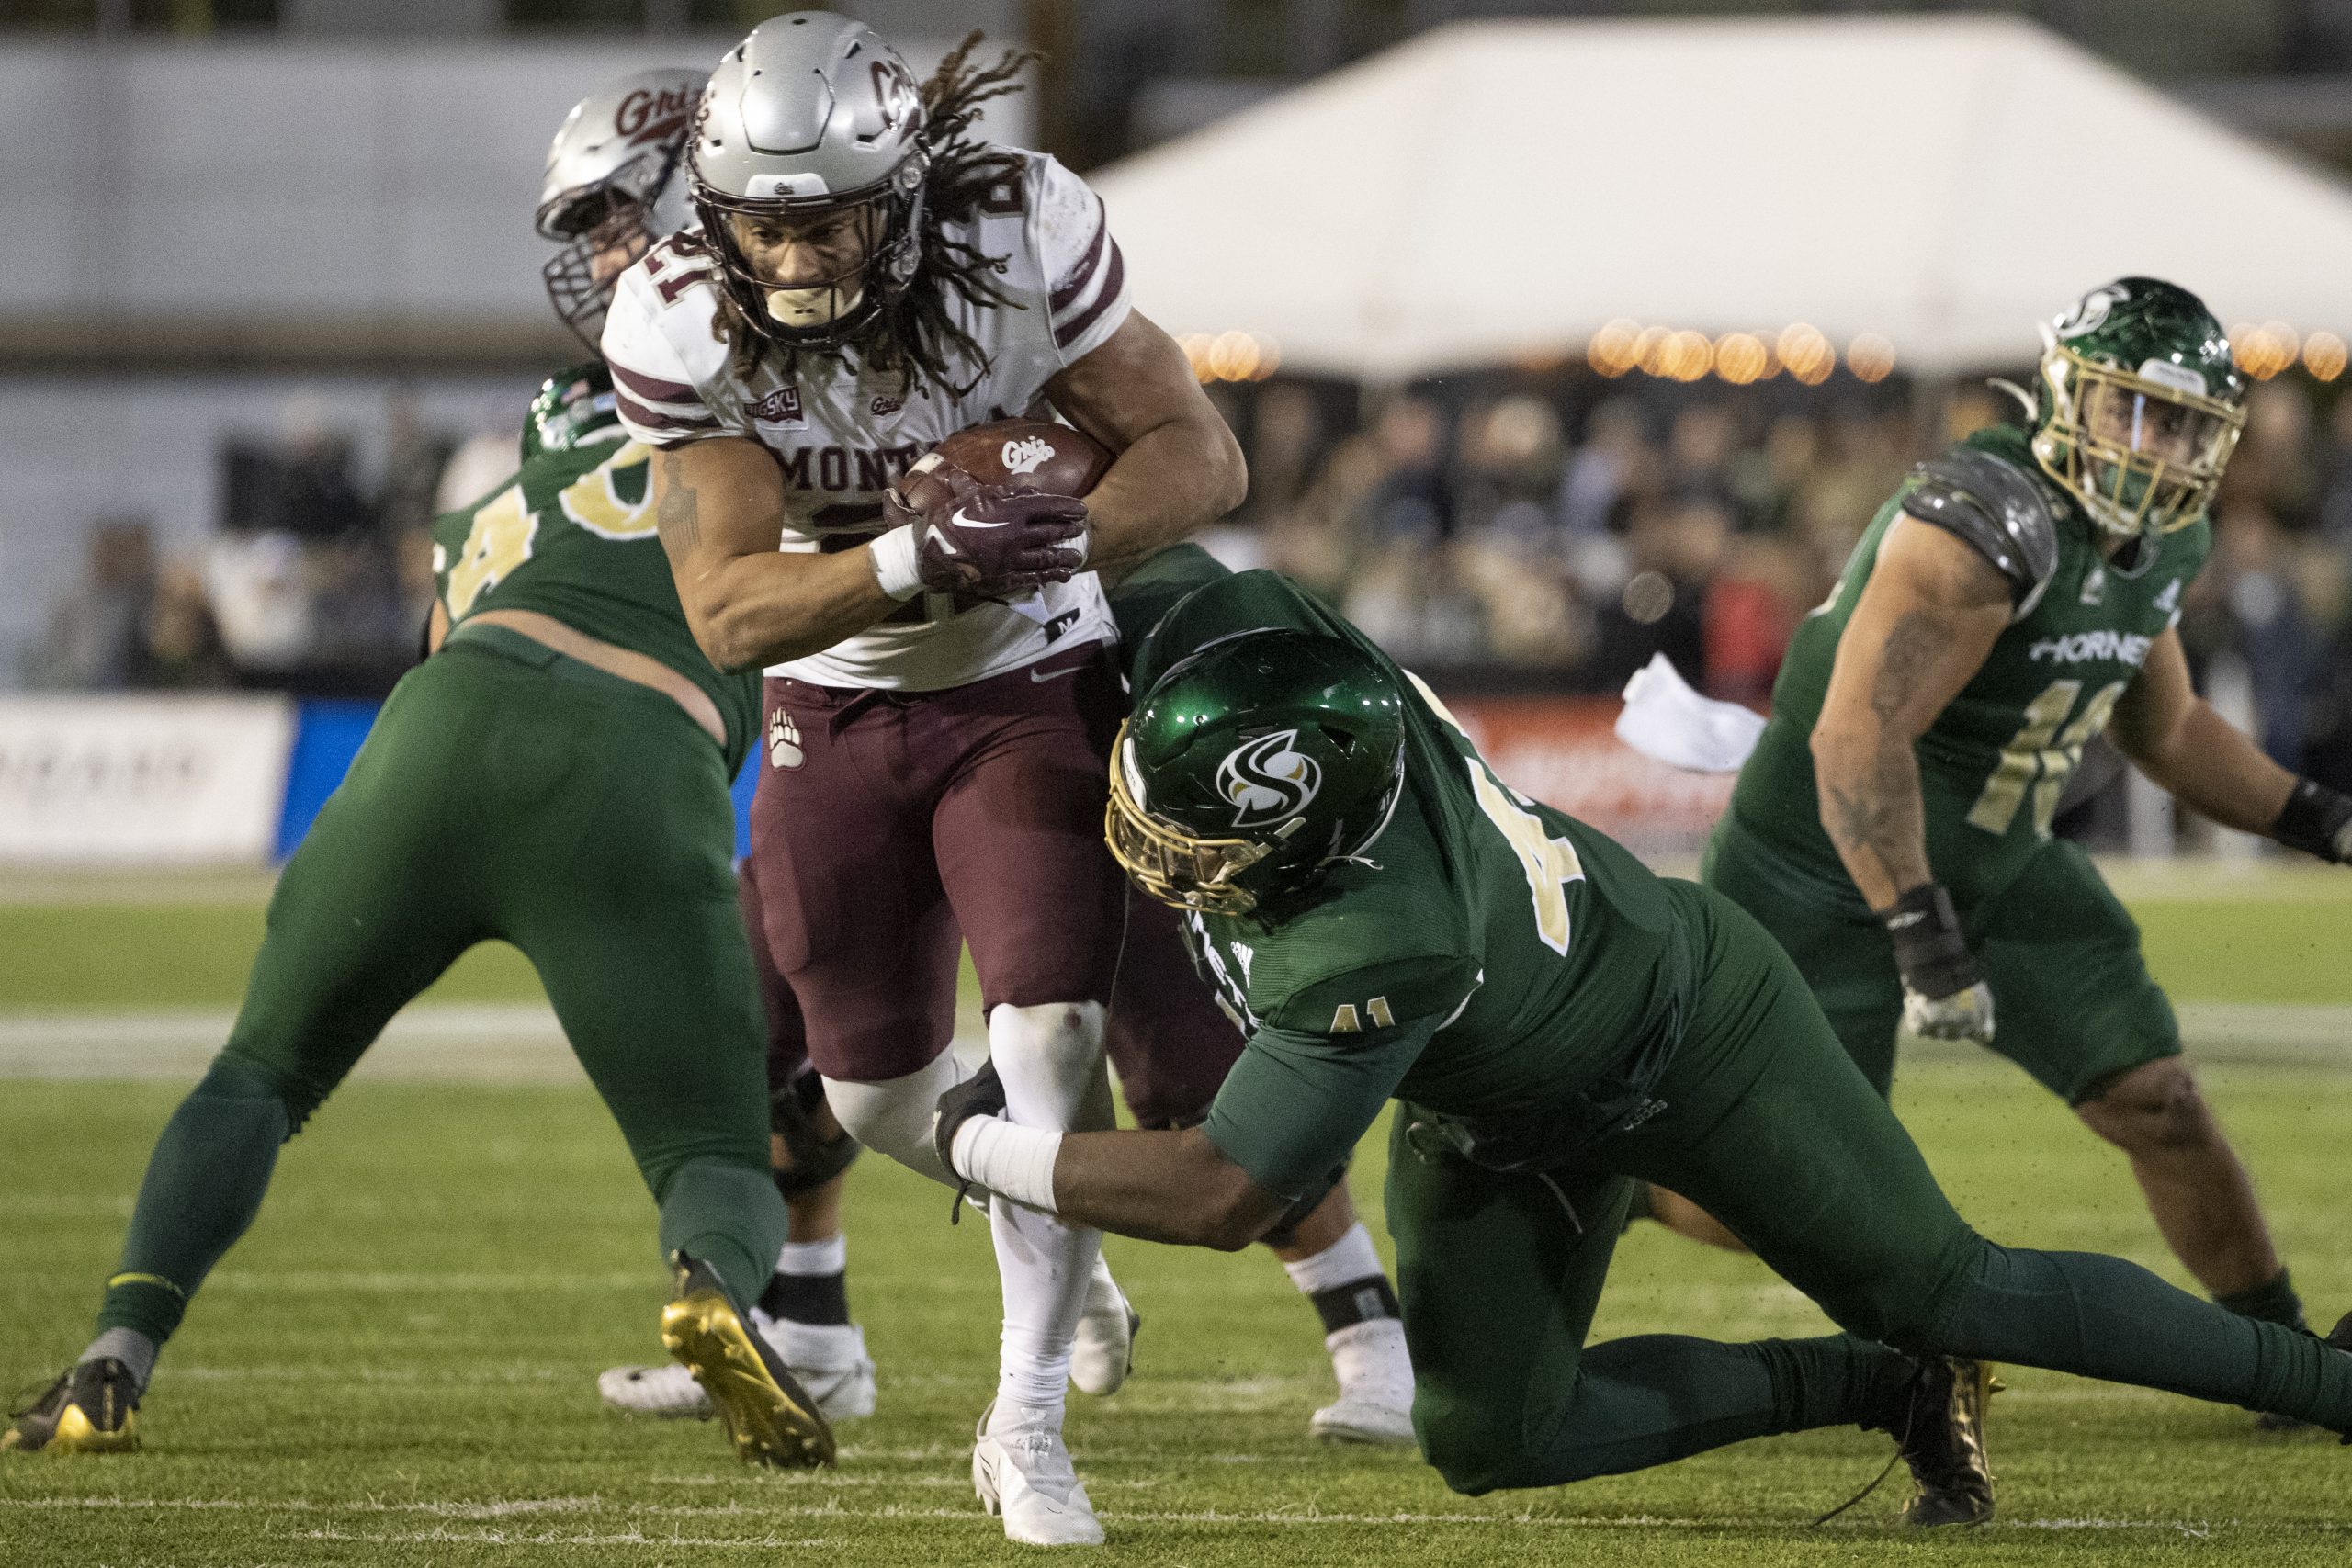 Marcus Knight #21 of the Montana Grizzlies runs with the ball as he gets tackled by DeShawn Lynch #...